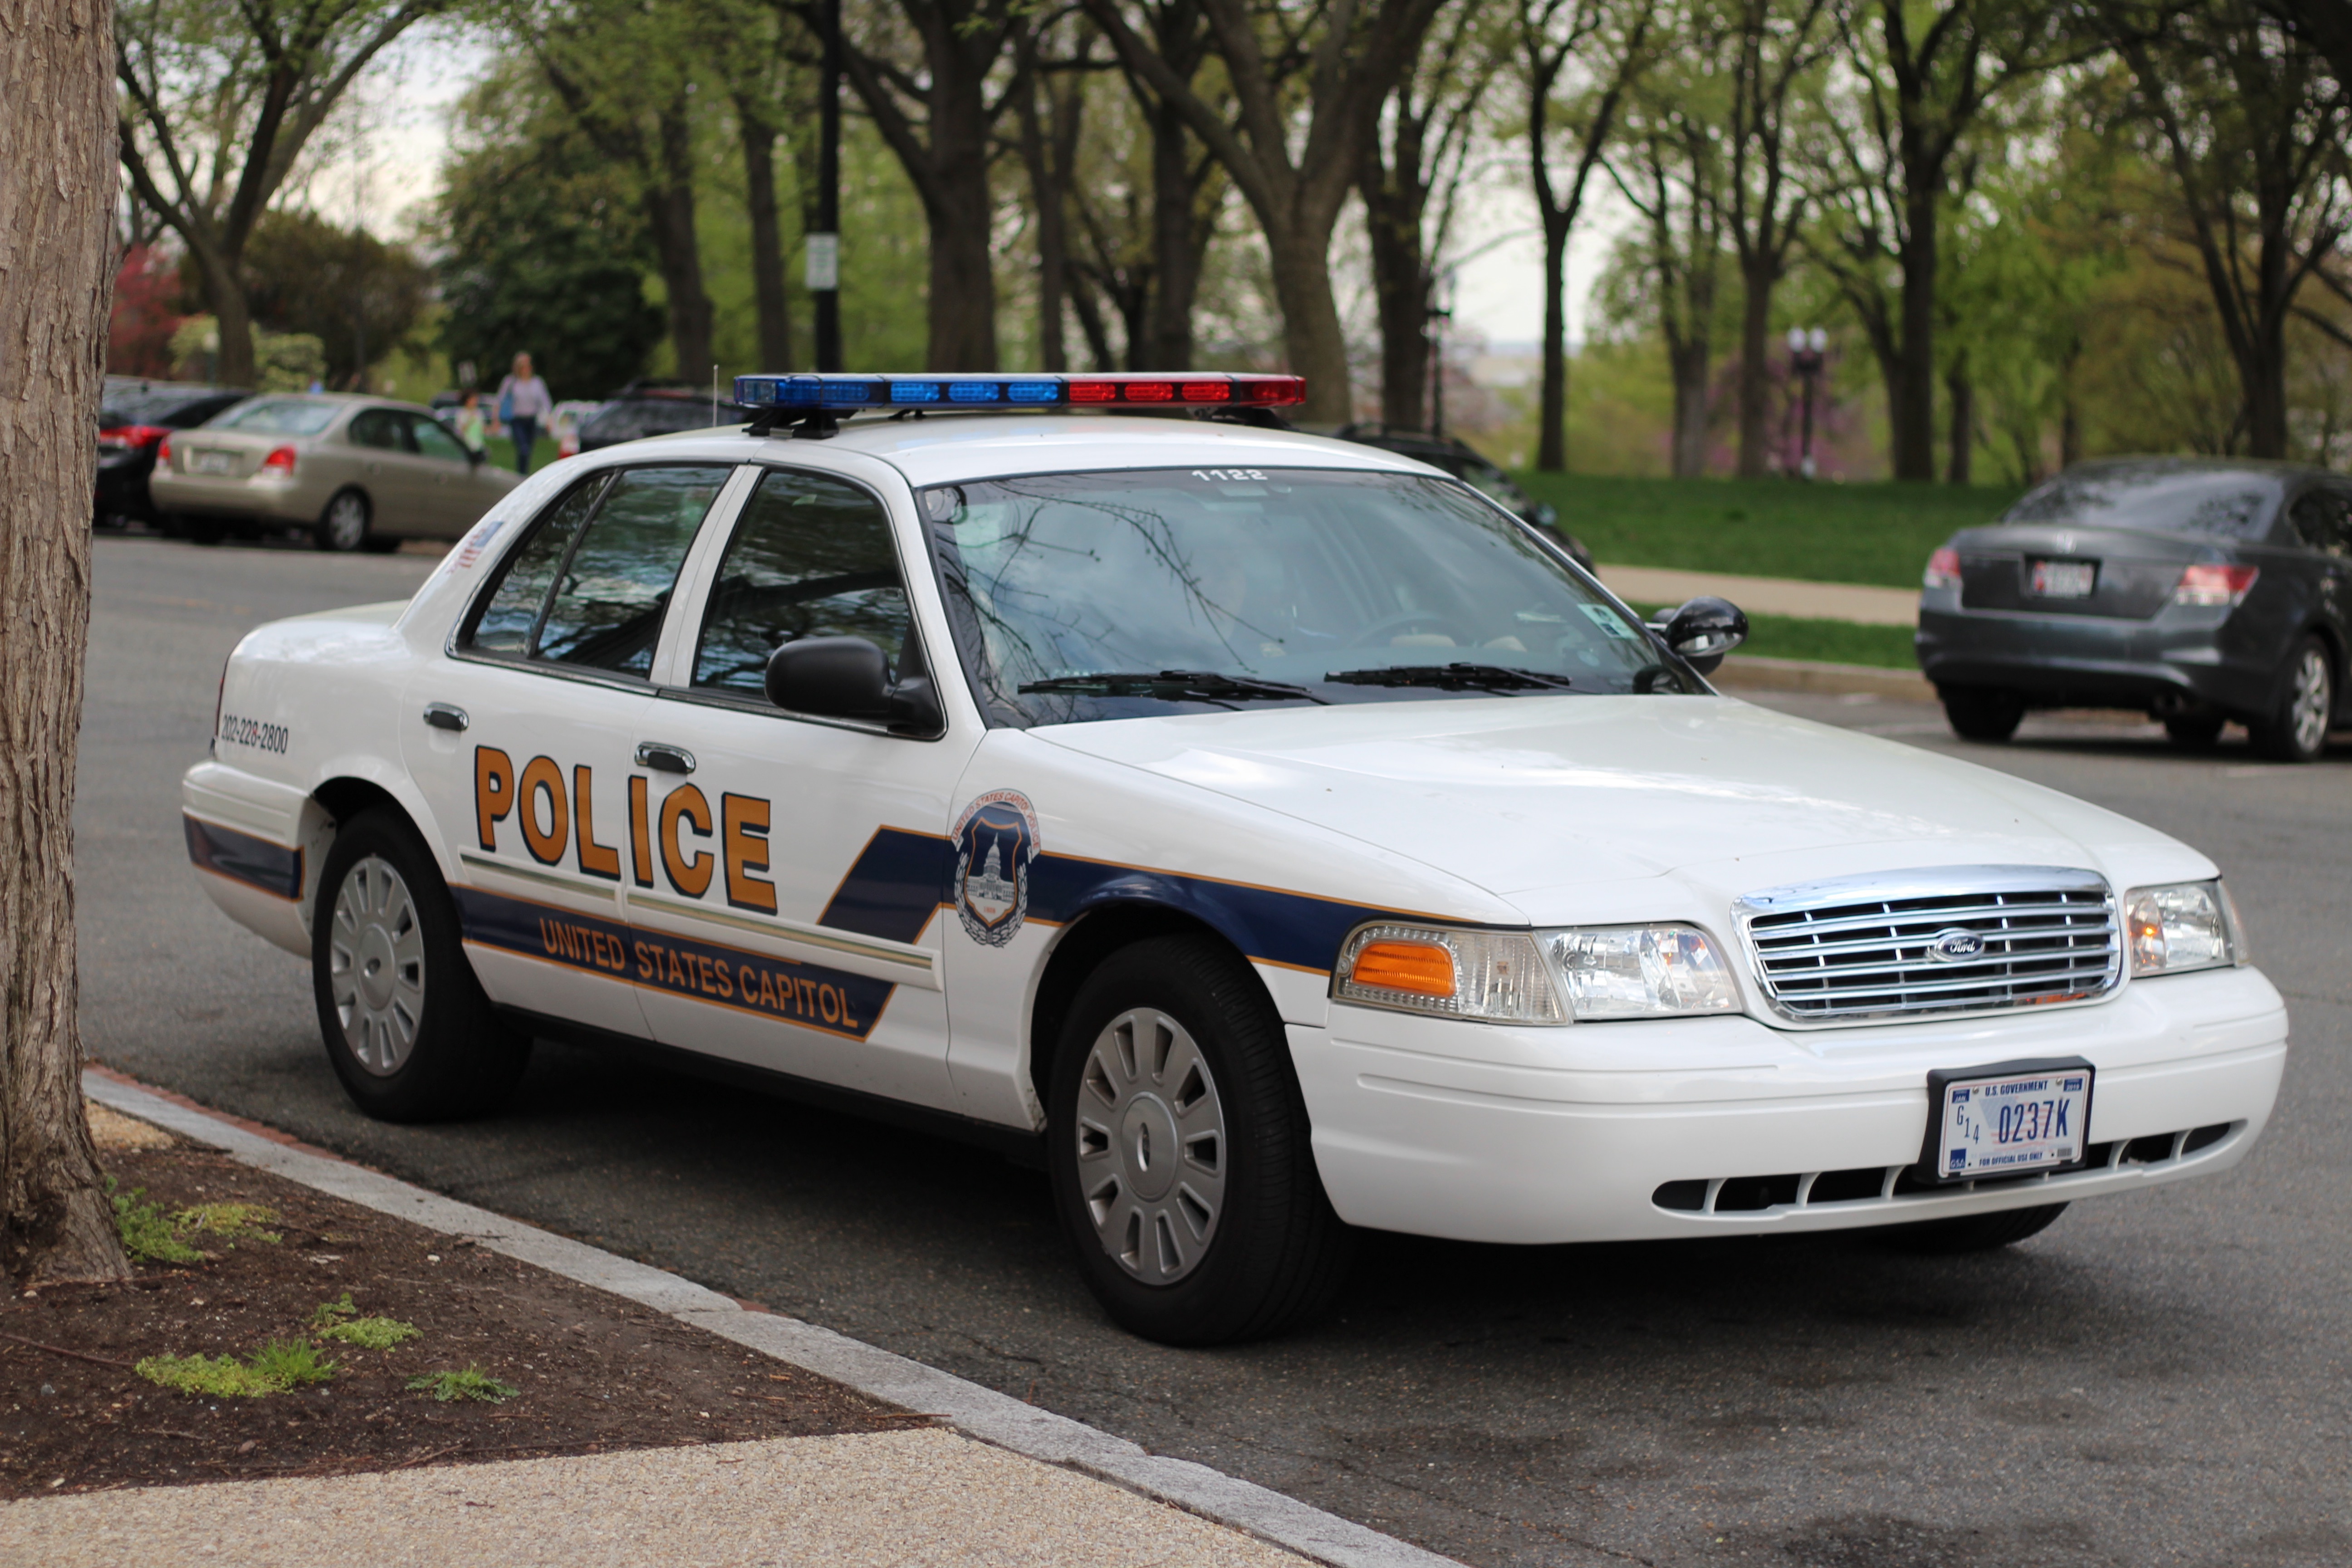 United states capitol police crown victoria photo